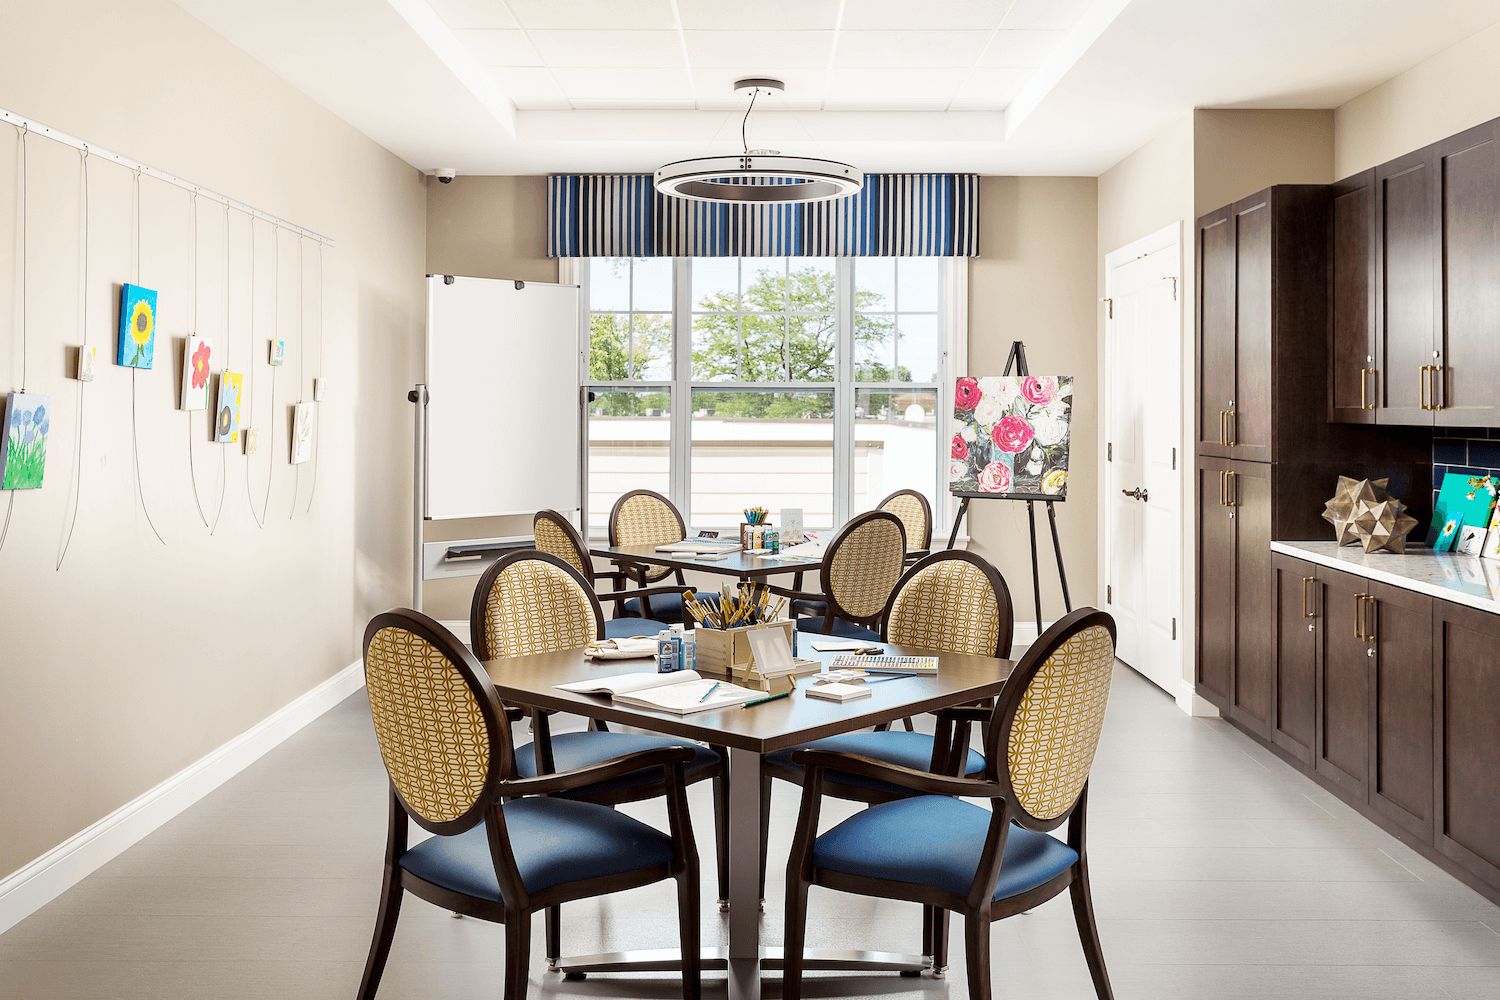 Interior view of Arbor Terrace Glenview senior living community featuring dining room and kitchen decor.